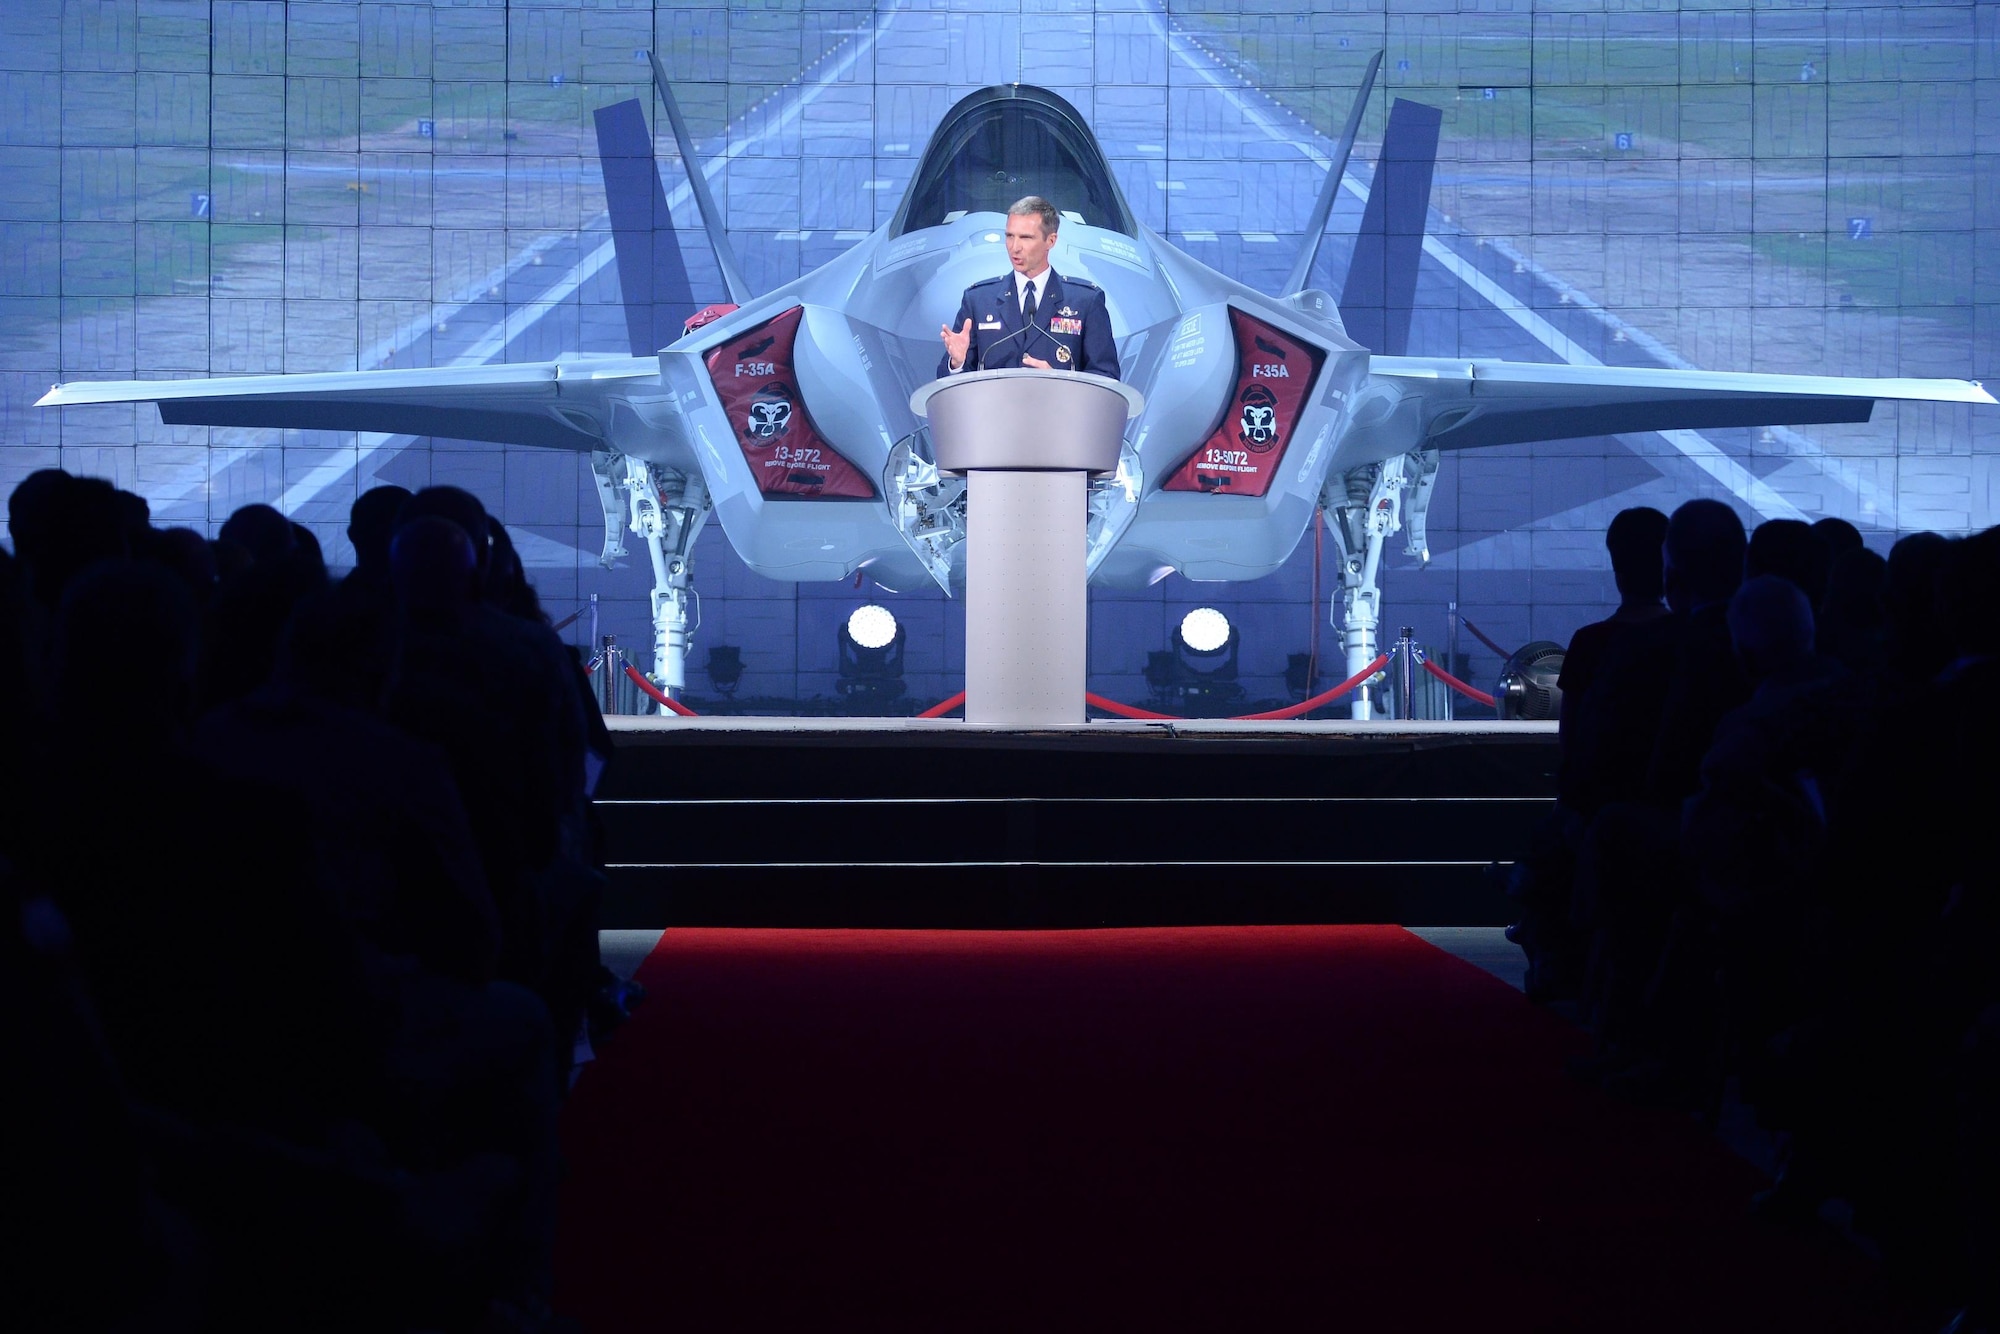 Col. Bryan Radliff, the 419th Fighter Wing commander, makes closing remarks during an F-35A Lightning II unveiling ceremony Oct. 14, 2015, at Hill Air Force Base, Utah. The ceremony marked the formal beginning of F-35 operations at Hill, and commemorated the arrival of the first combat-coded F-35 aircraft at the base. Hill will receive a total of 72 F-35s on a staggered basis through 2019. The jets will be flown and maintained by Airmen assigned to the 388 and 419th Fighter Wings. (U.S. Air Force photo/R. Nial Bradshaw)